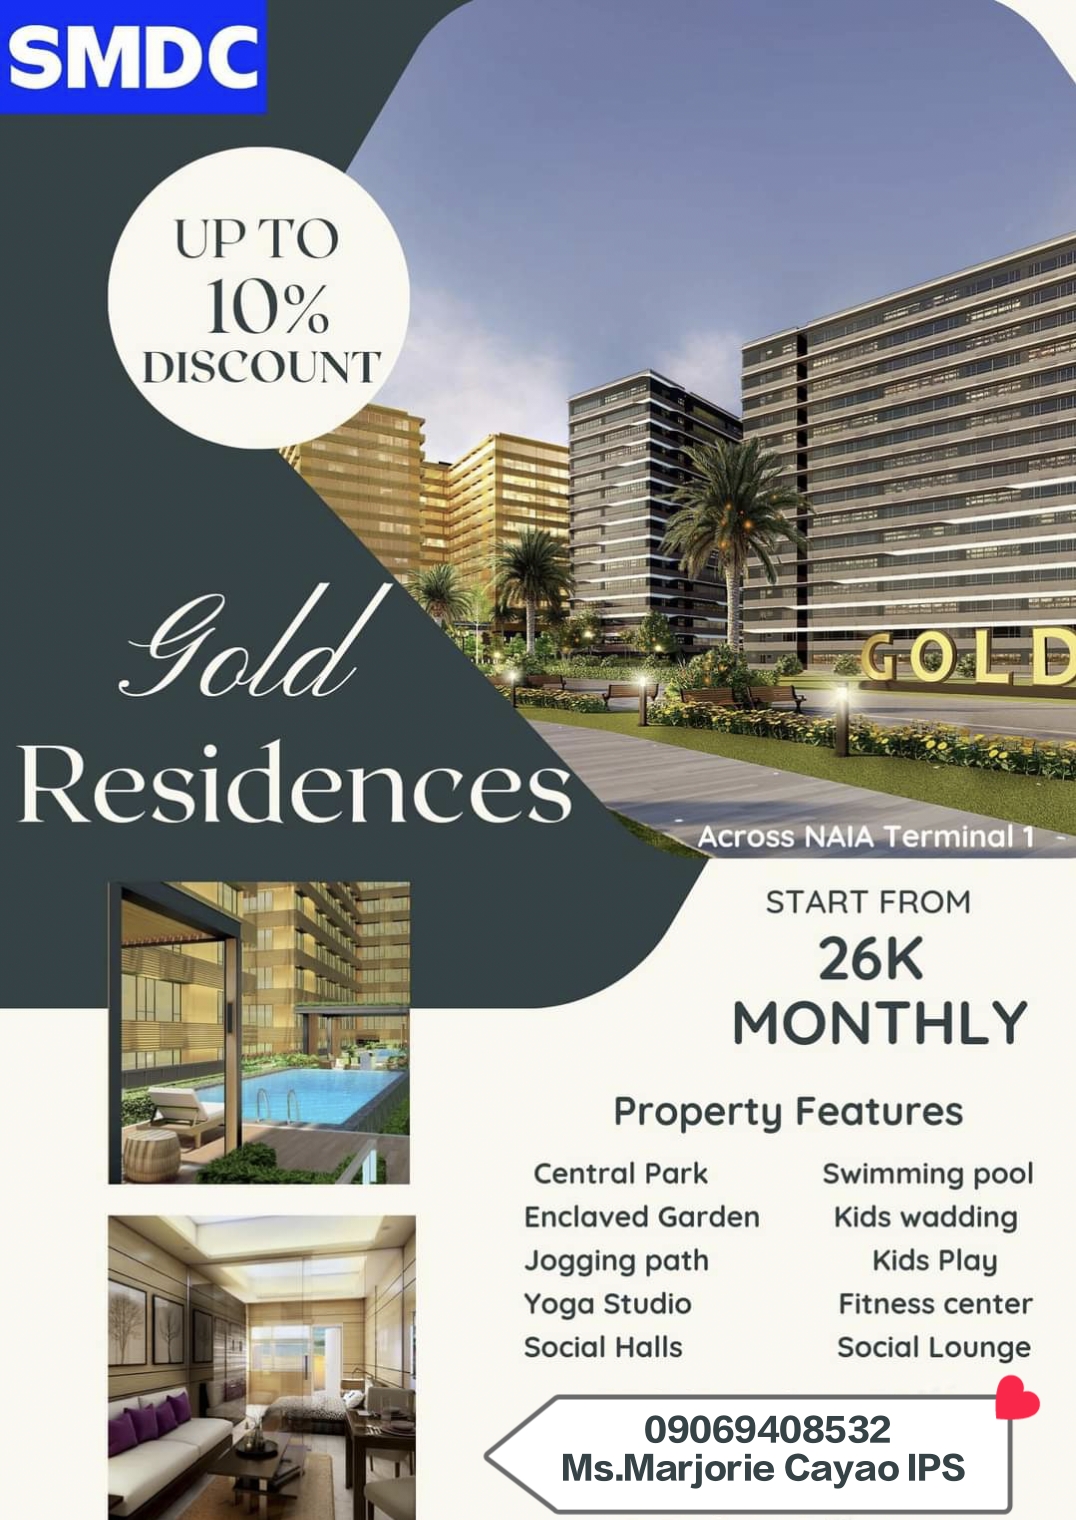 New Affordable Price Condo Units RFO and Preselling SMDC